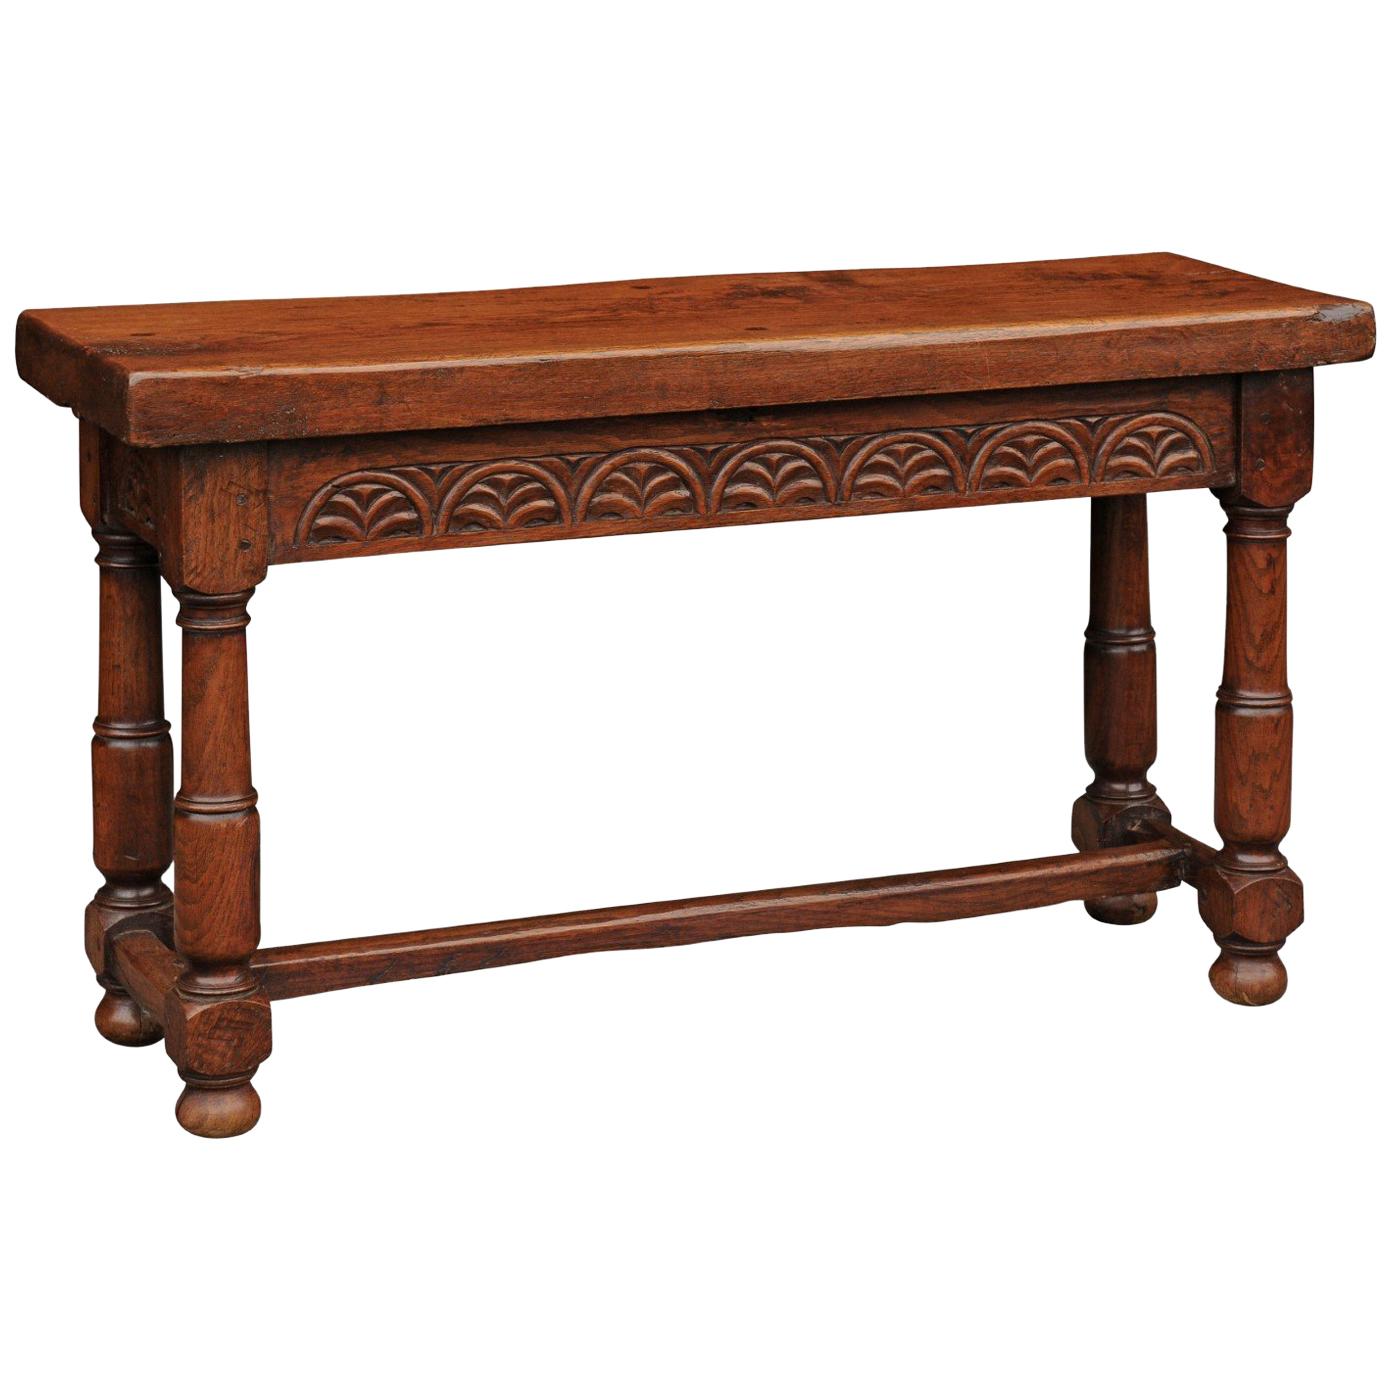 English Oak 1880s Bench with Low-Relief Carved Decor and Column-Shaped Legs For Sale